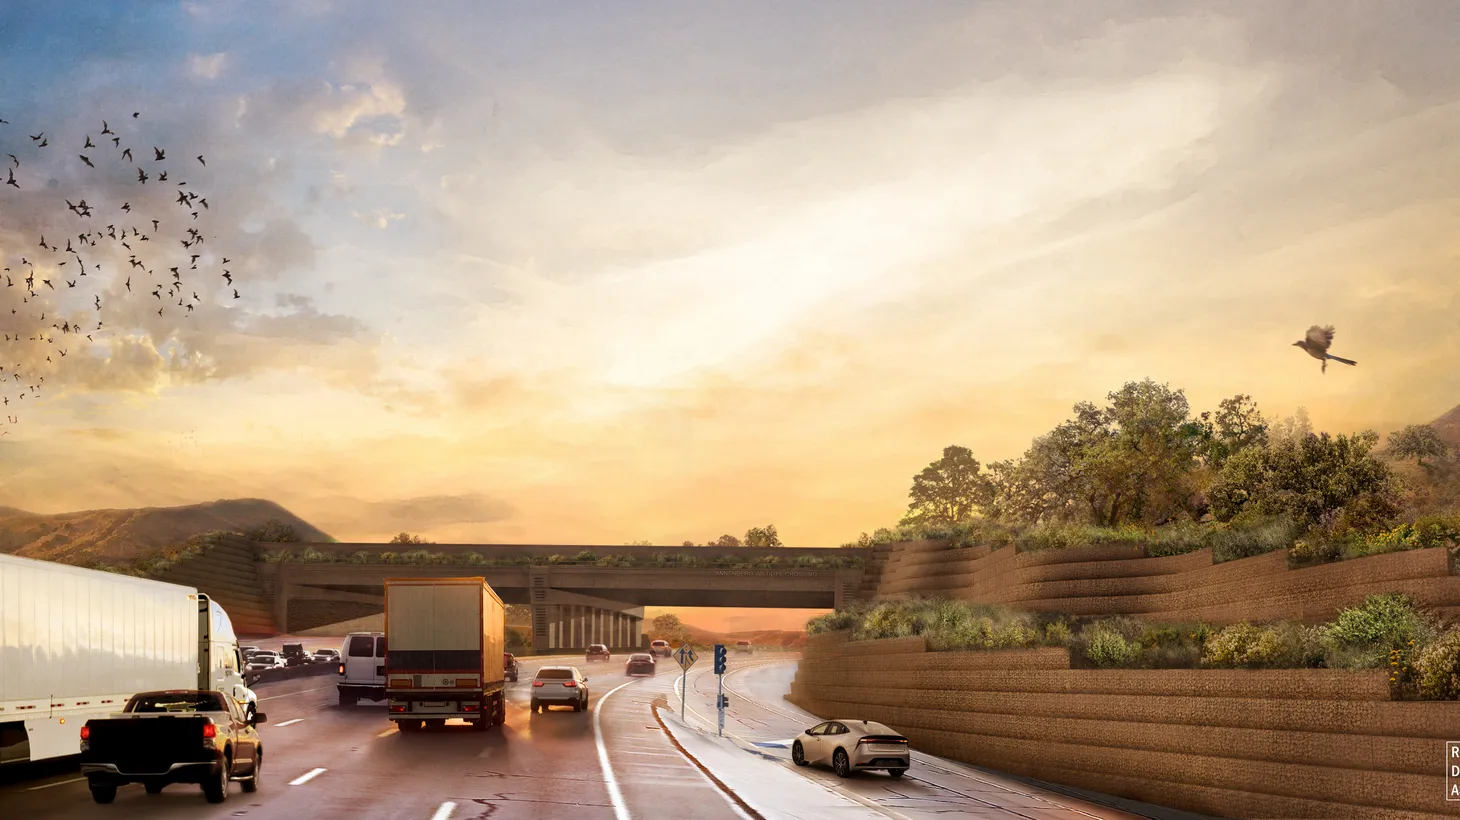 This rendering shows the completed Wallis Annenberg Wildlife Crossing, which will provide a safe passage for animals and insects over the 101 freeway.